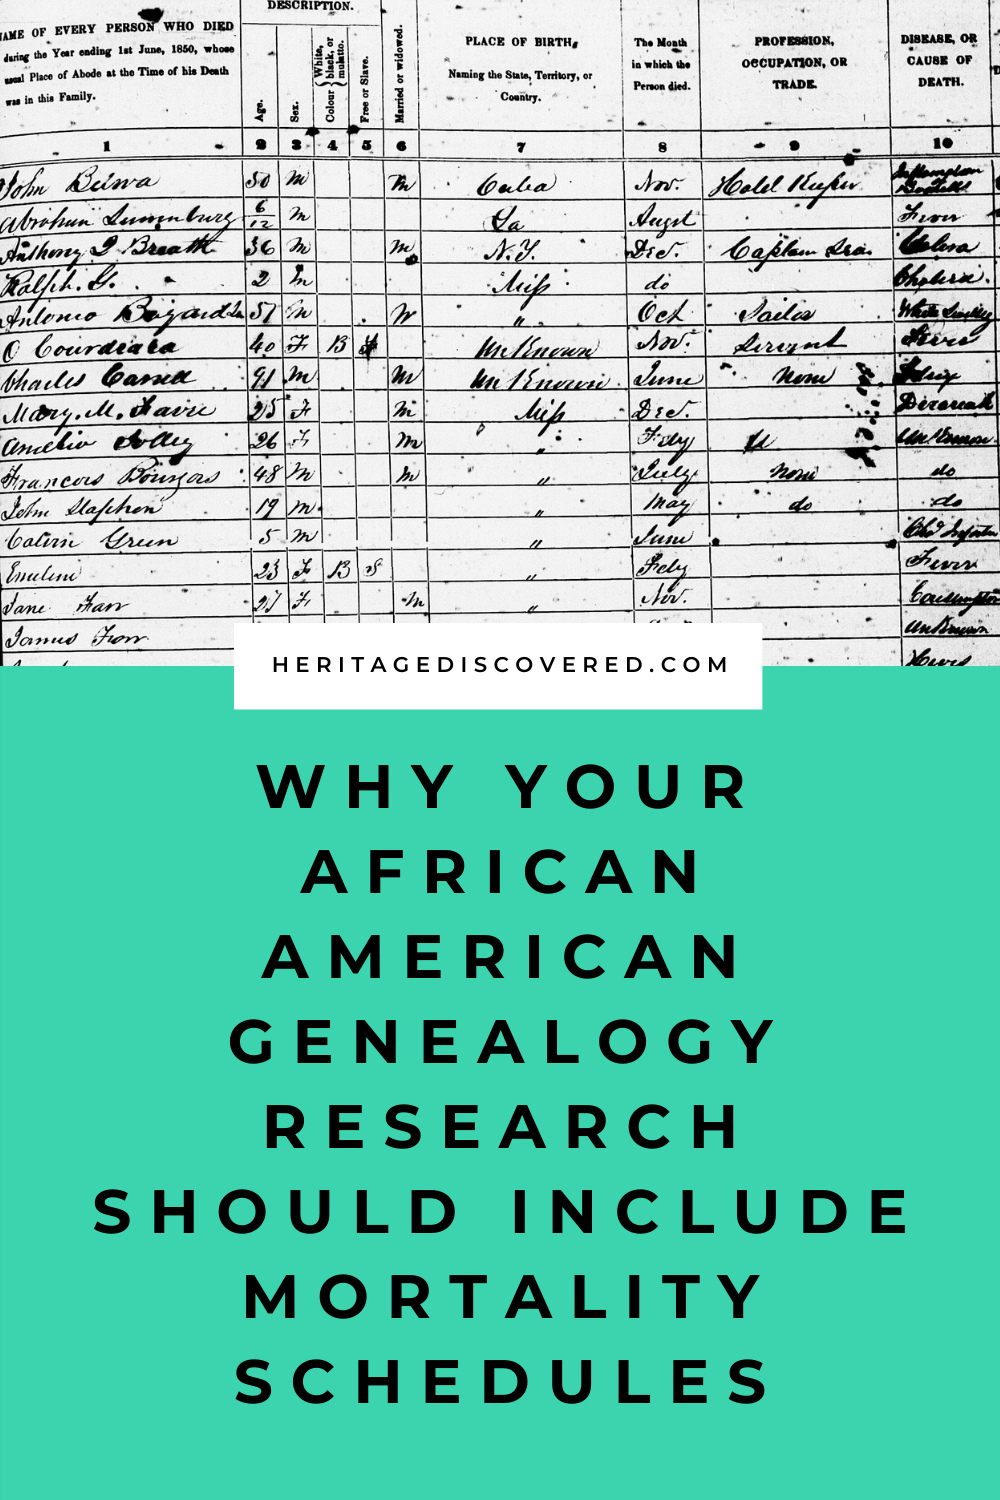 why-your-african-american-genealogy-research-use-mortality-schedules.png